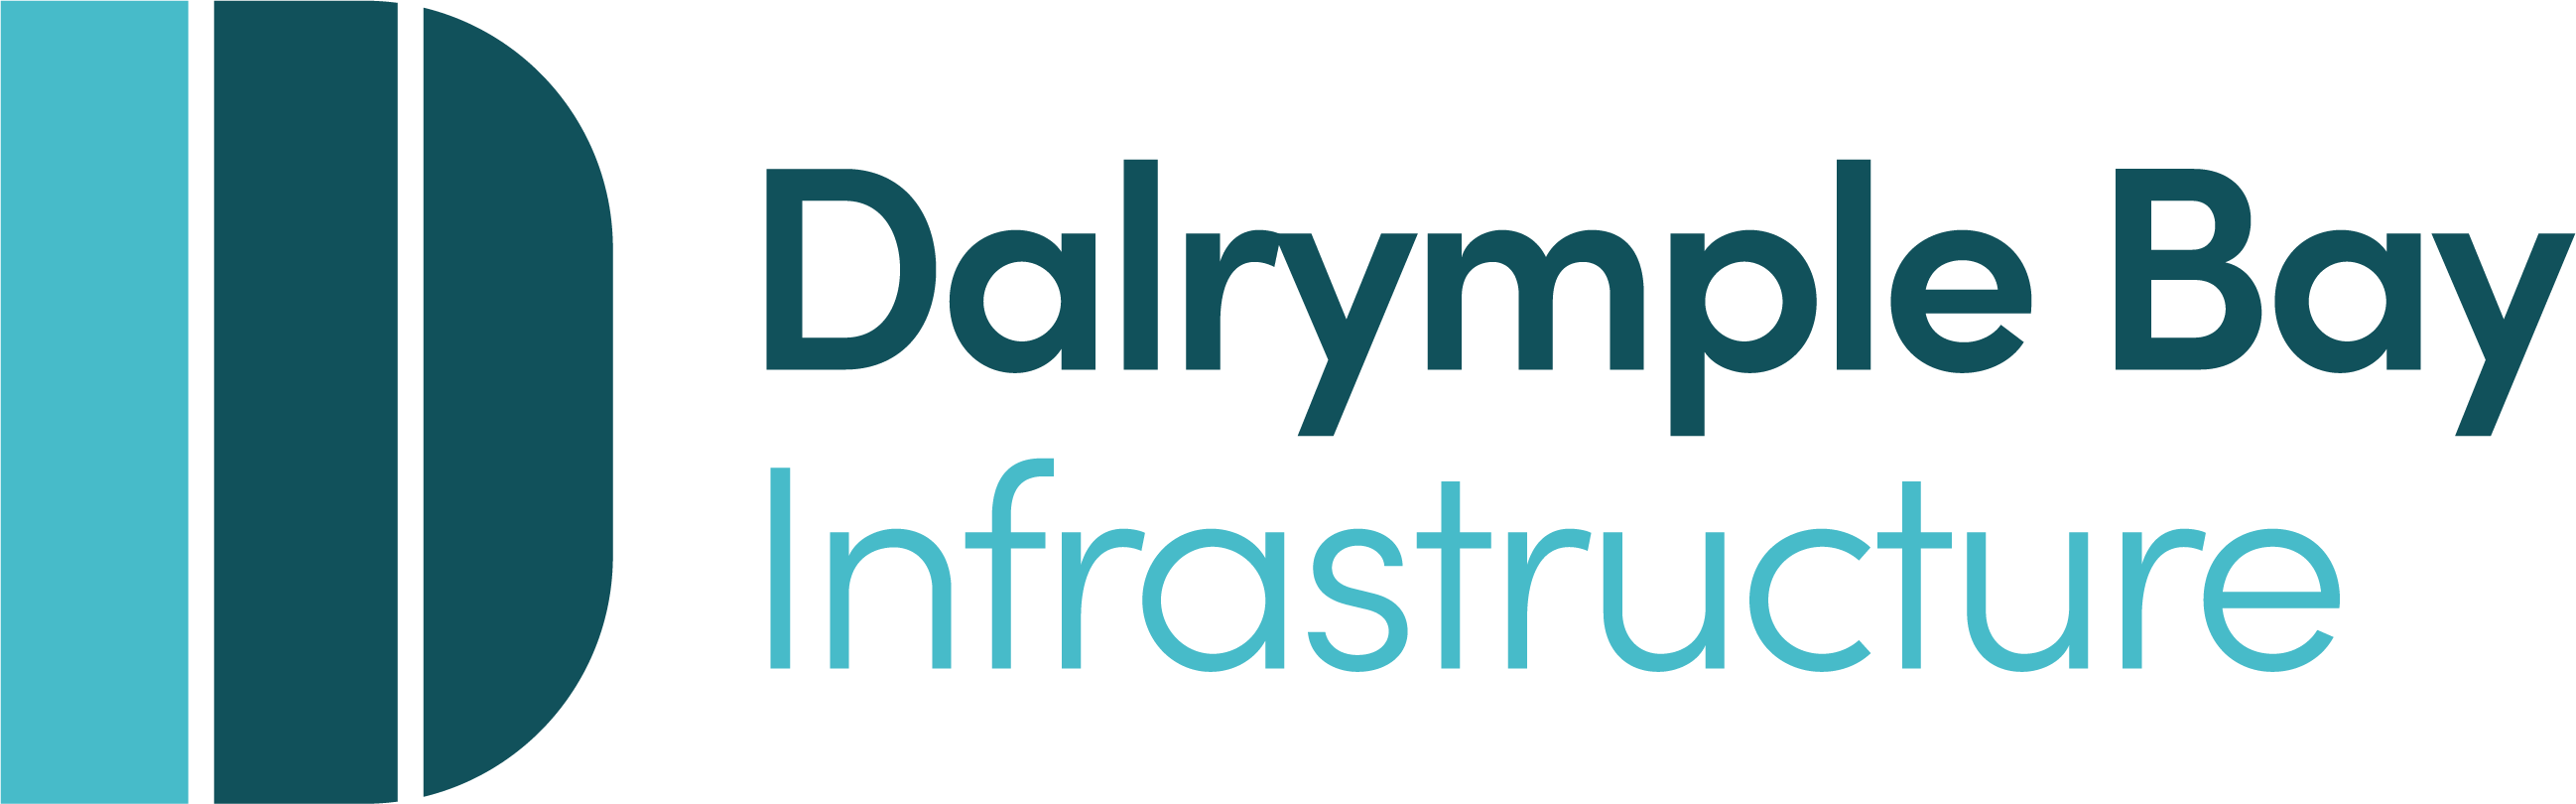 Dalrymple Bay Infrastructure Ltd Stapled (Ordinary Share , Unsecured note)